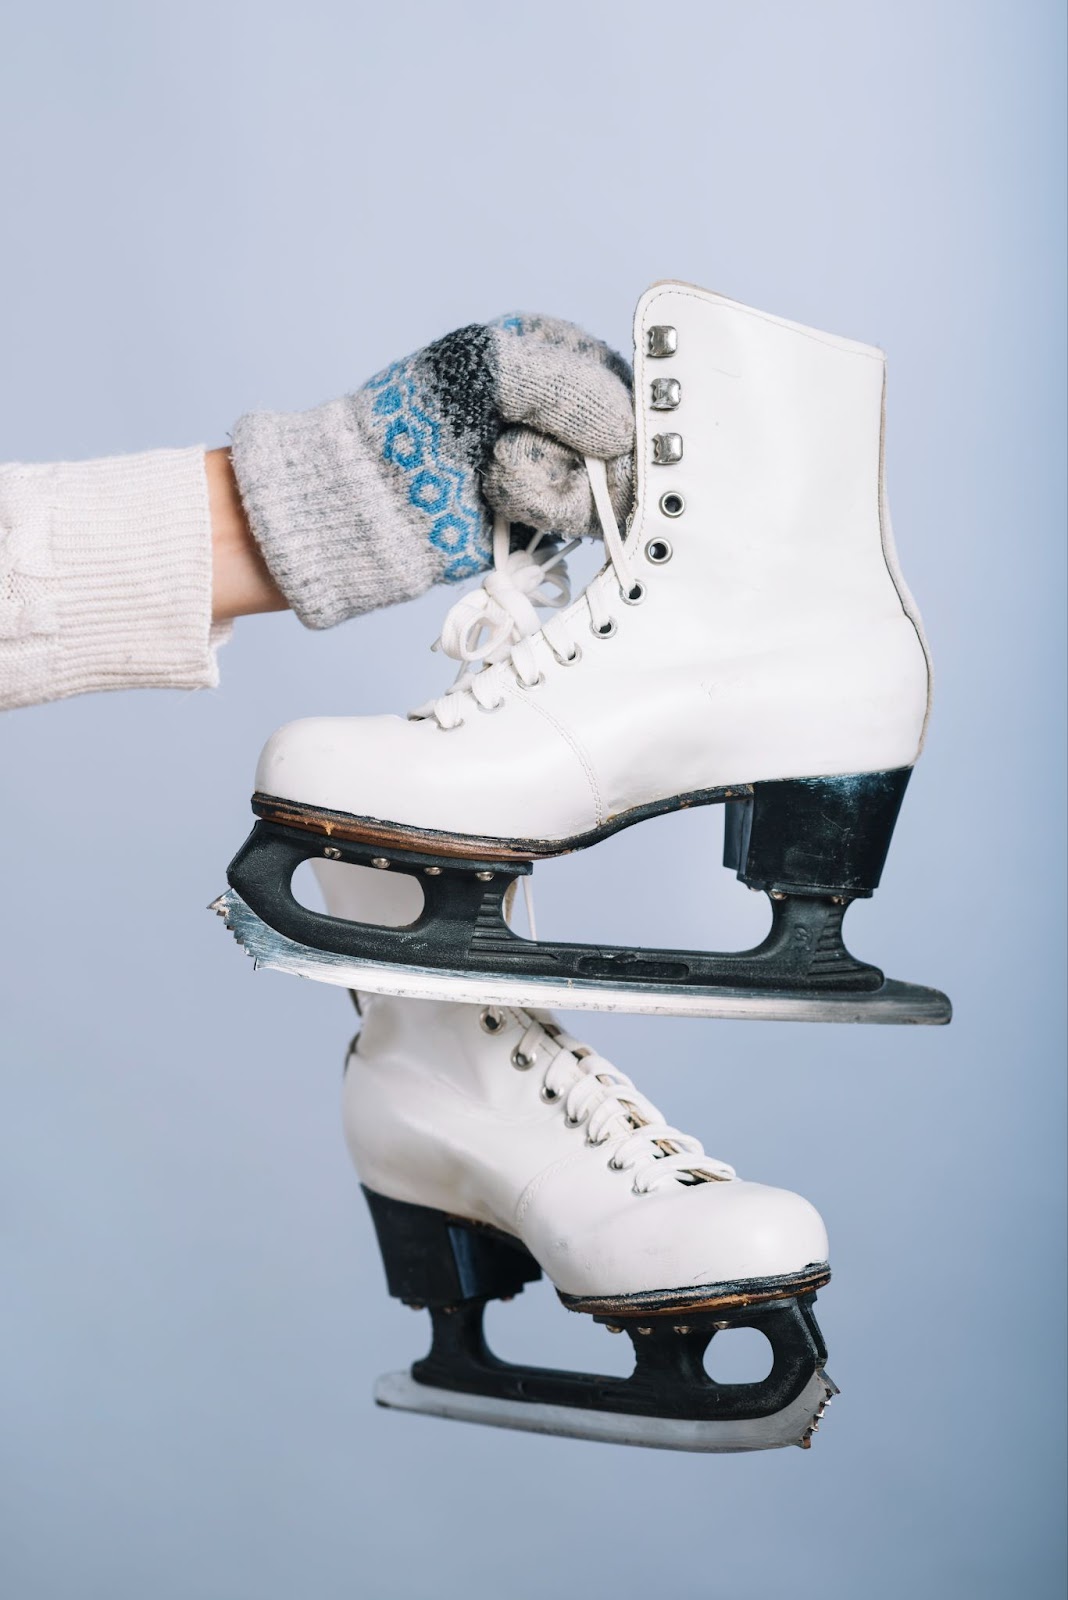 A woman holding a pair of skates